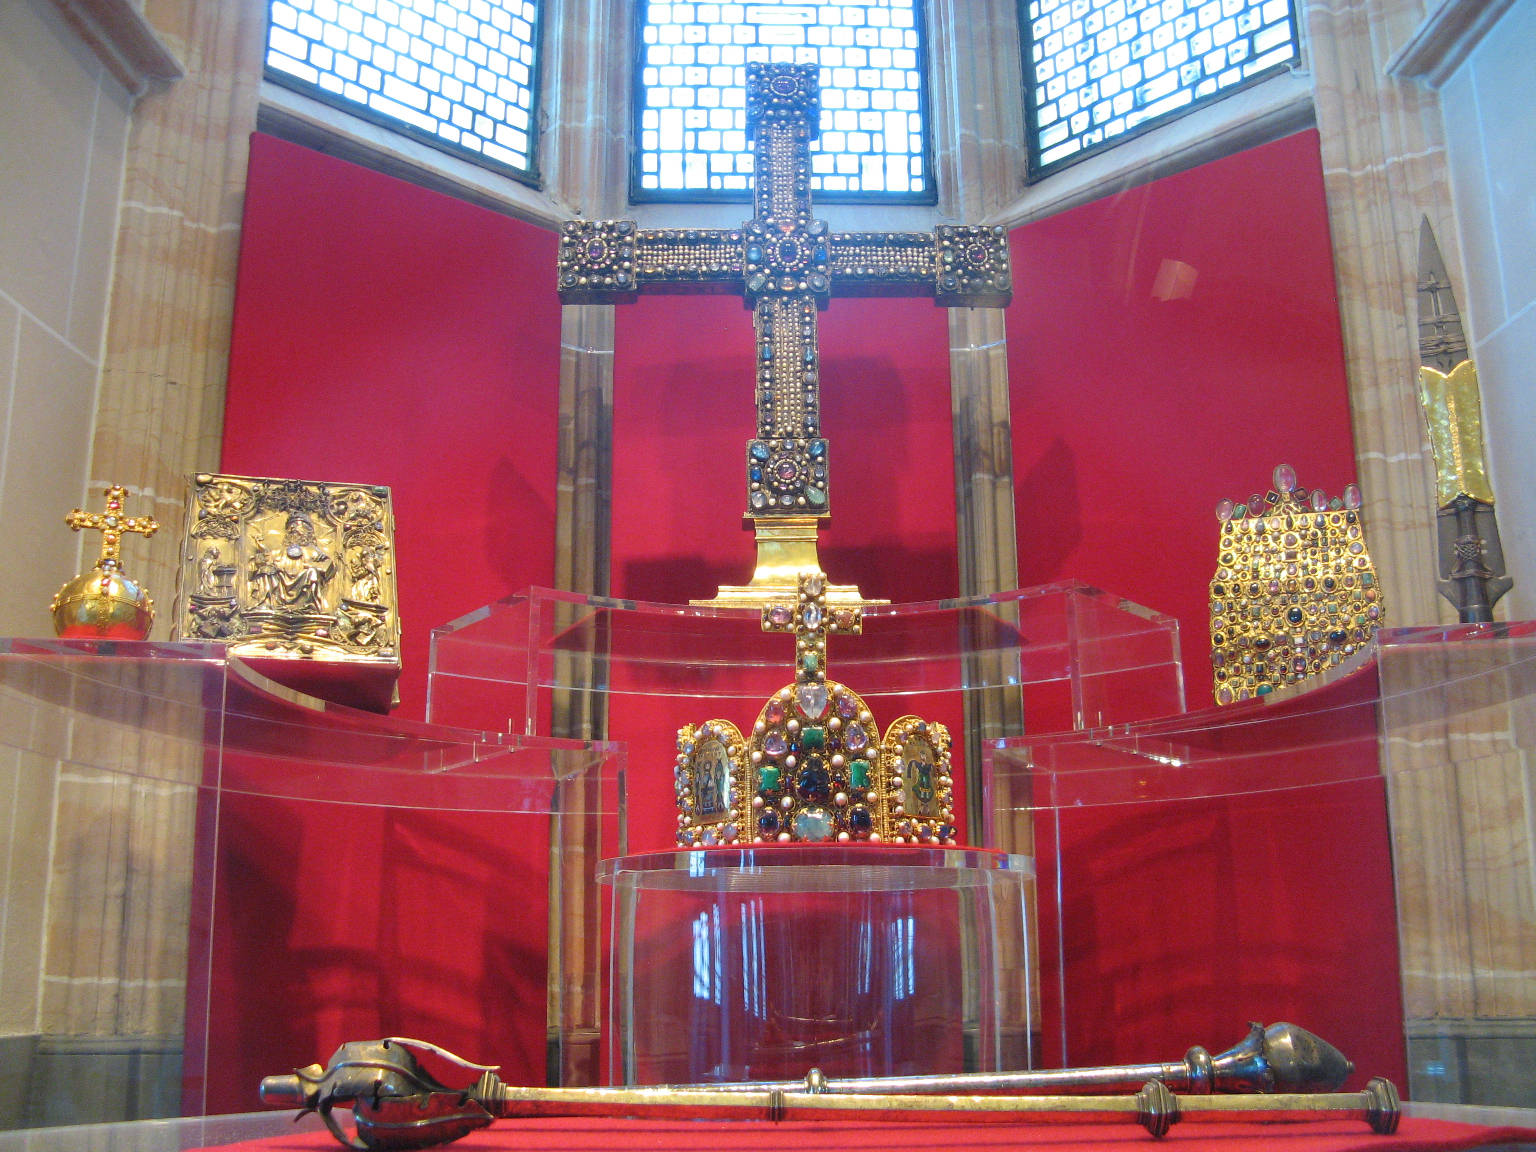 The Imperial Crown Jewels